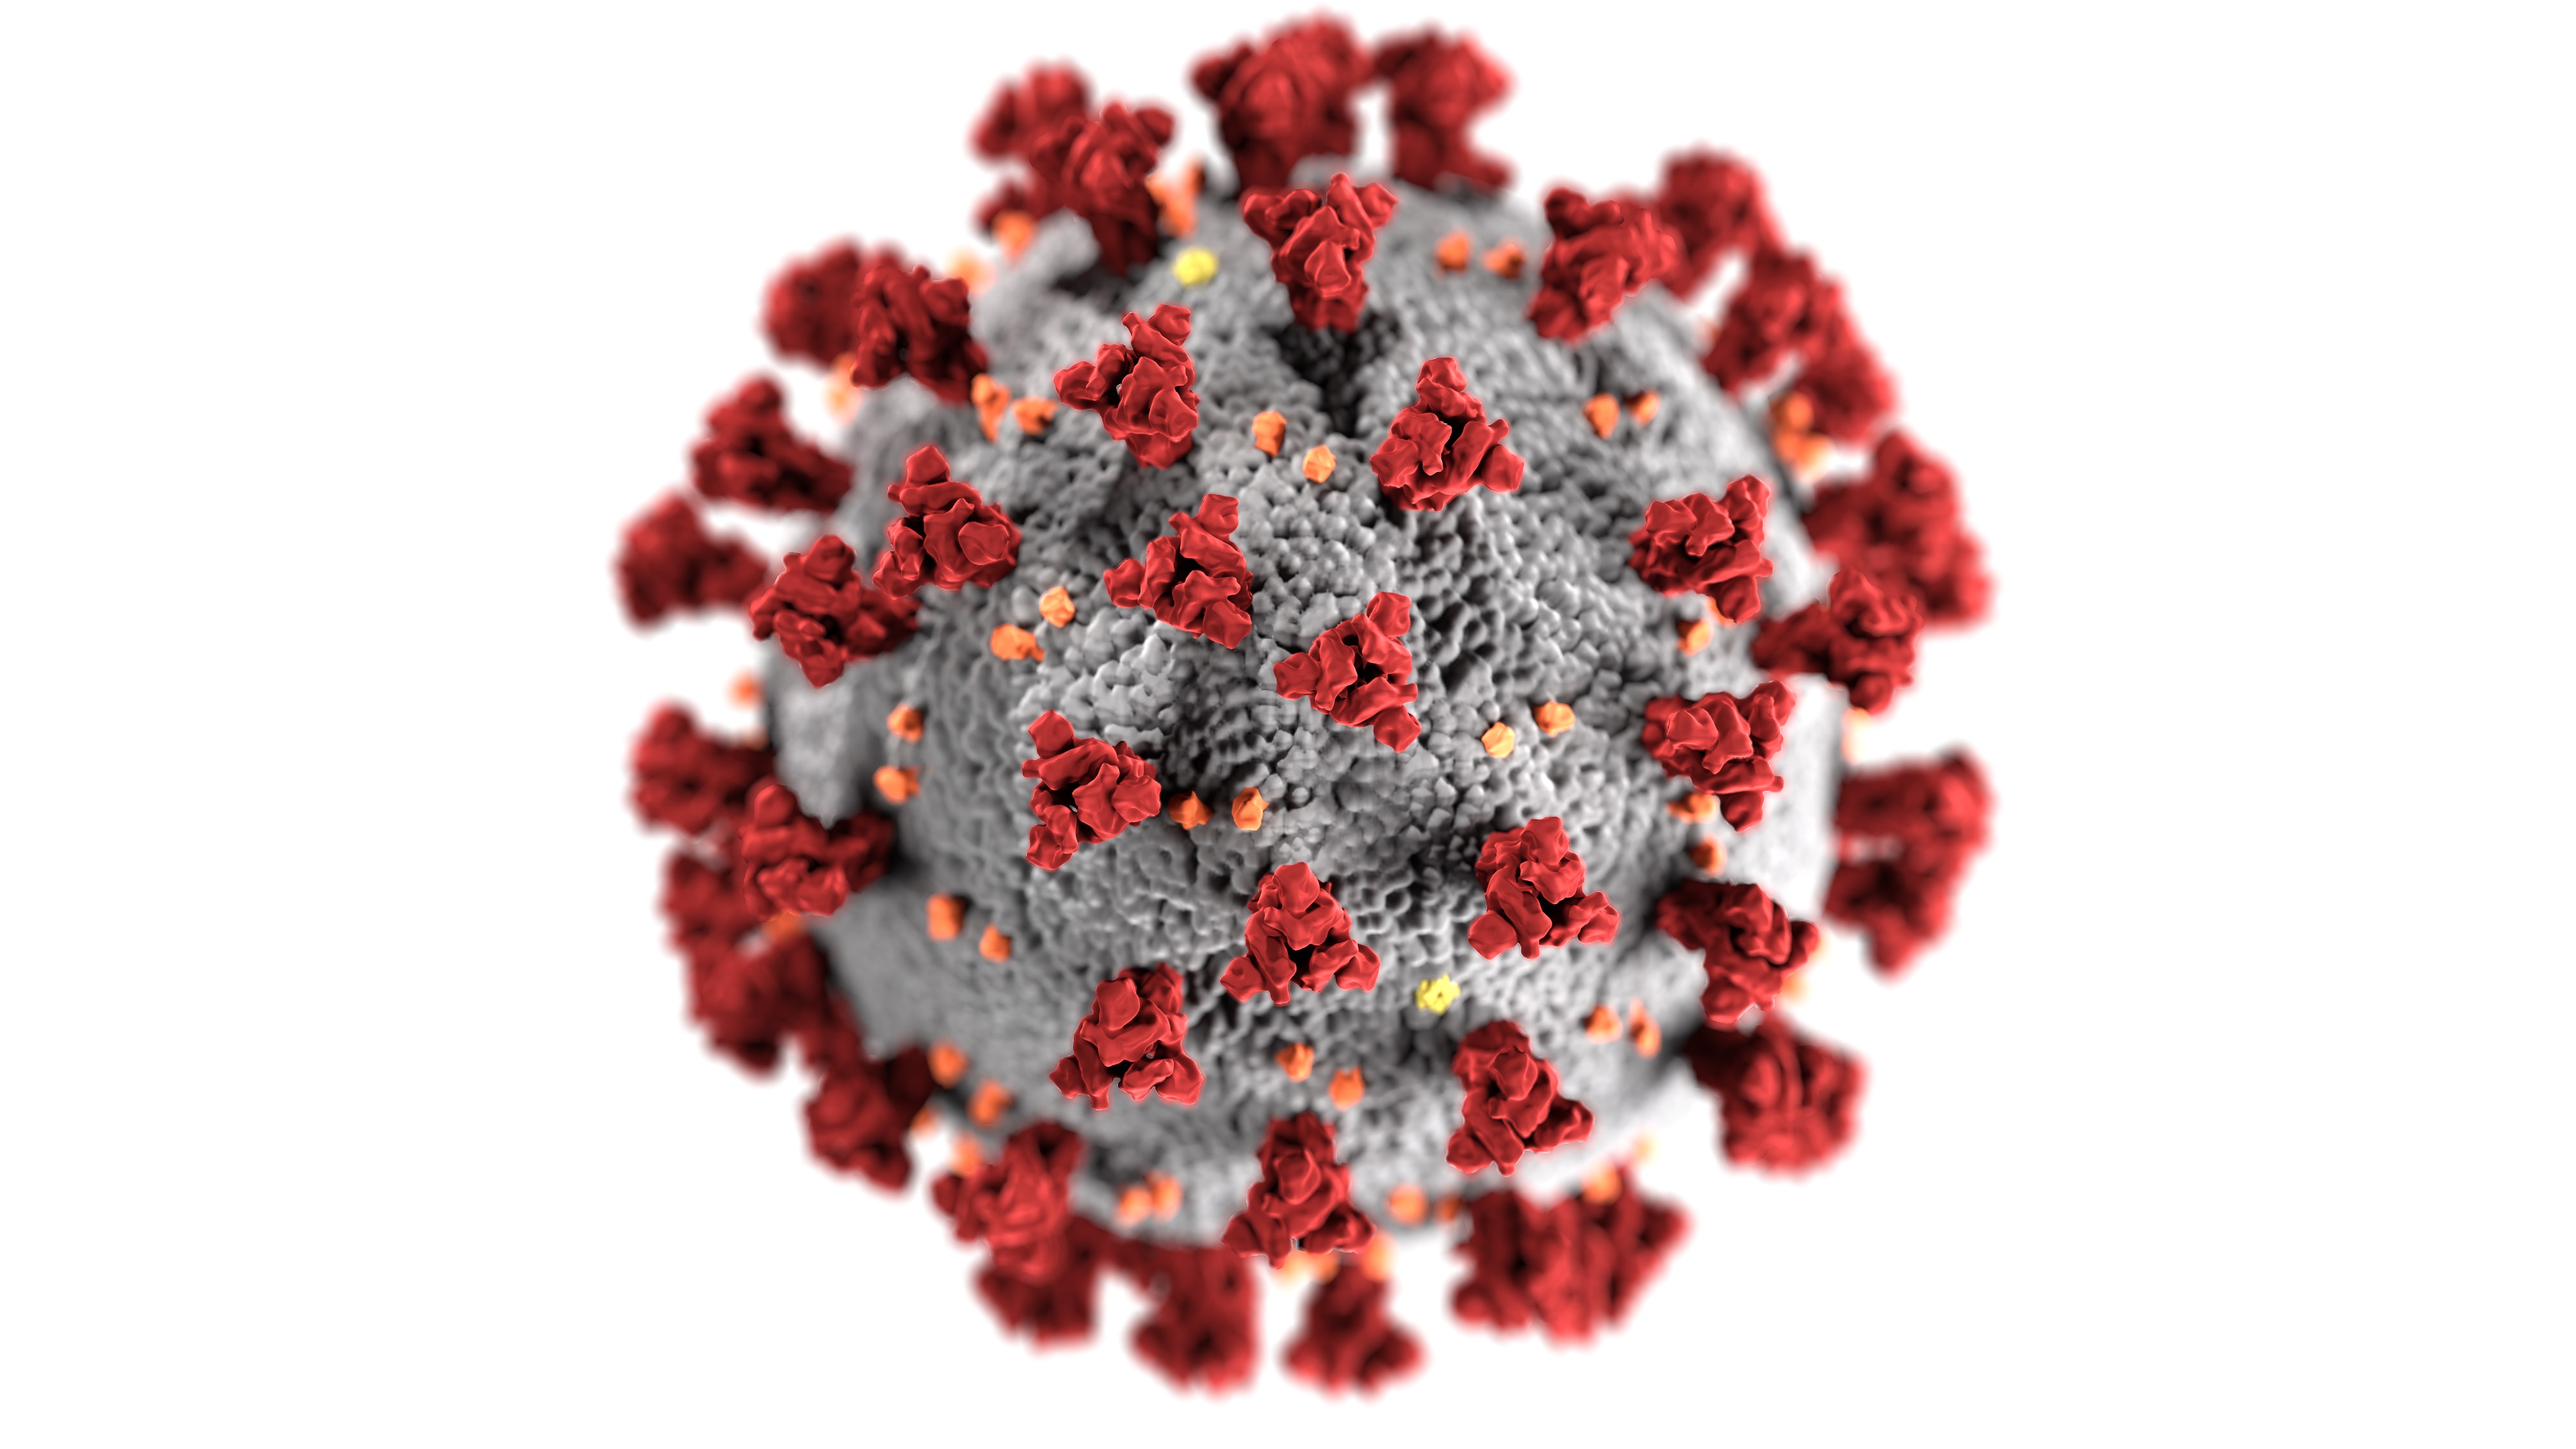 Image shows a picture of the Covid virus including the distinctive spike protein